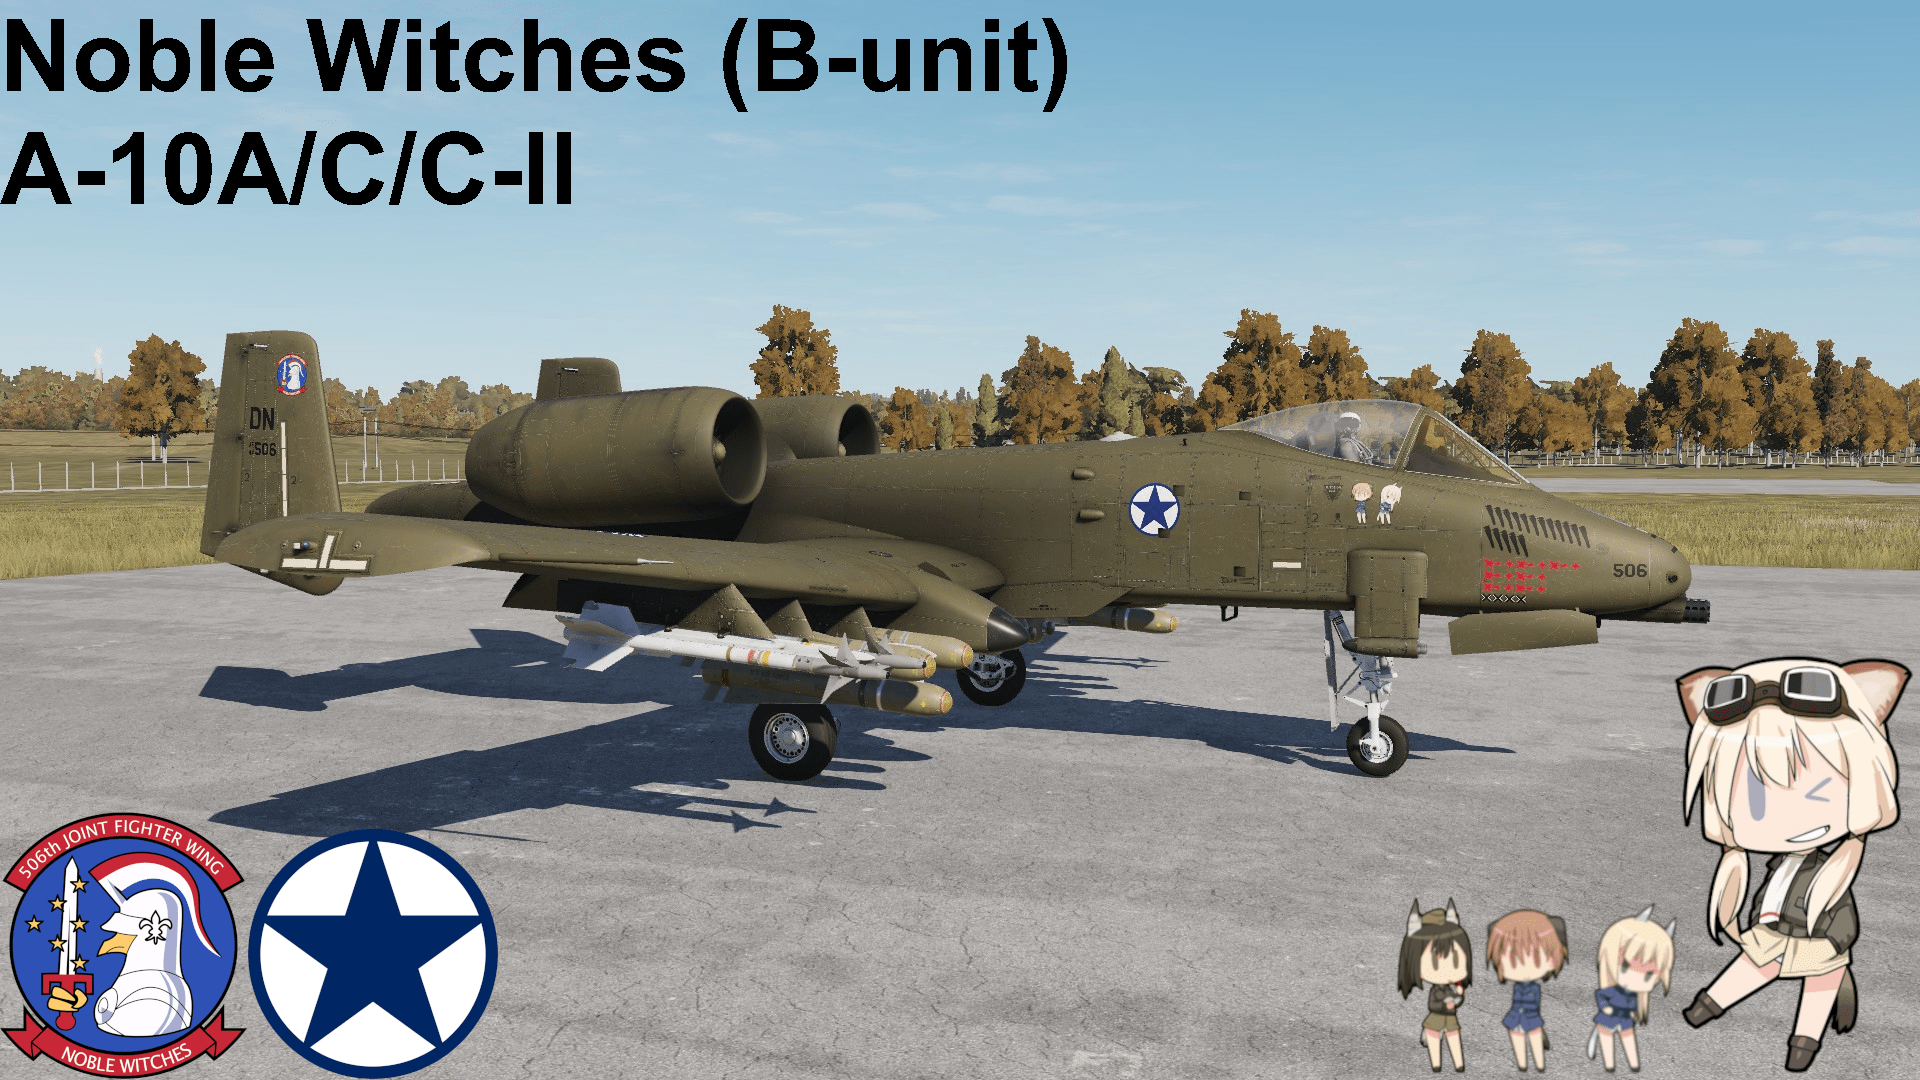 (OLD AND GARBAGE) World Witches - 506th JFW "Noble Witches (B-unit)" A-10A